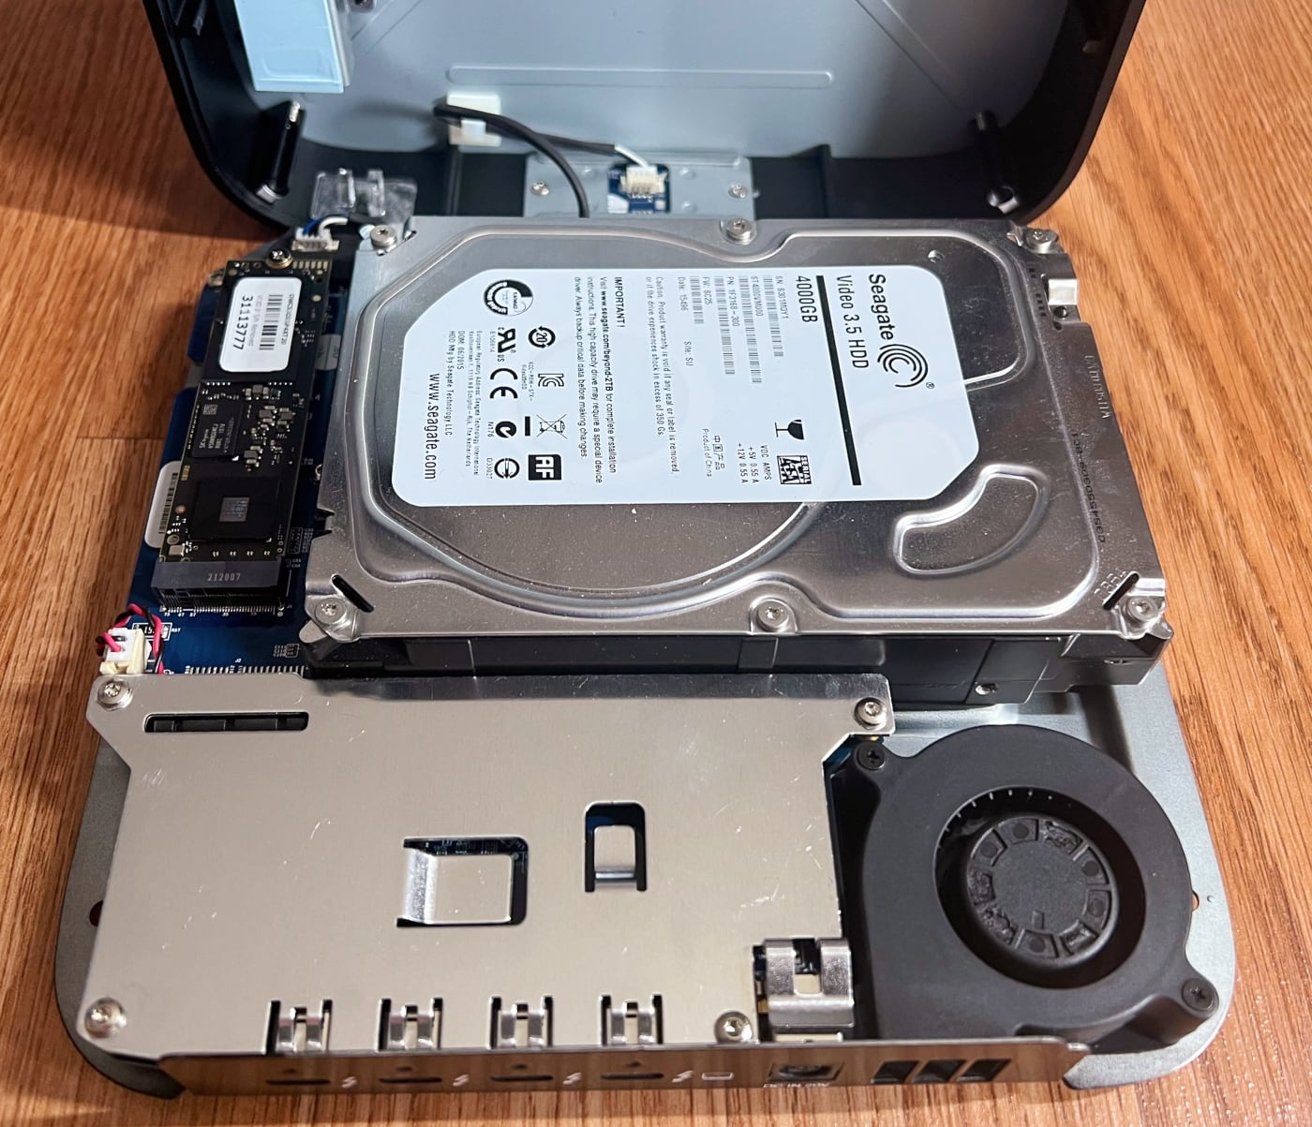 You can fit a 3.5-inch hard drive inside the enclosure, or alternatively an SSD, as well as an M.2 NVMe drive. 